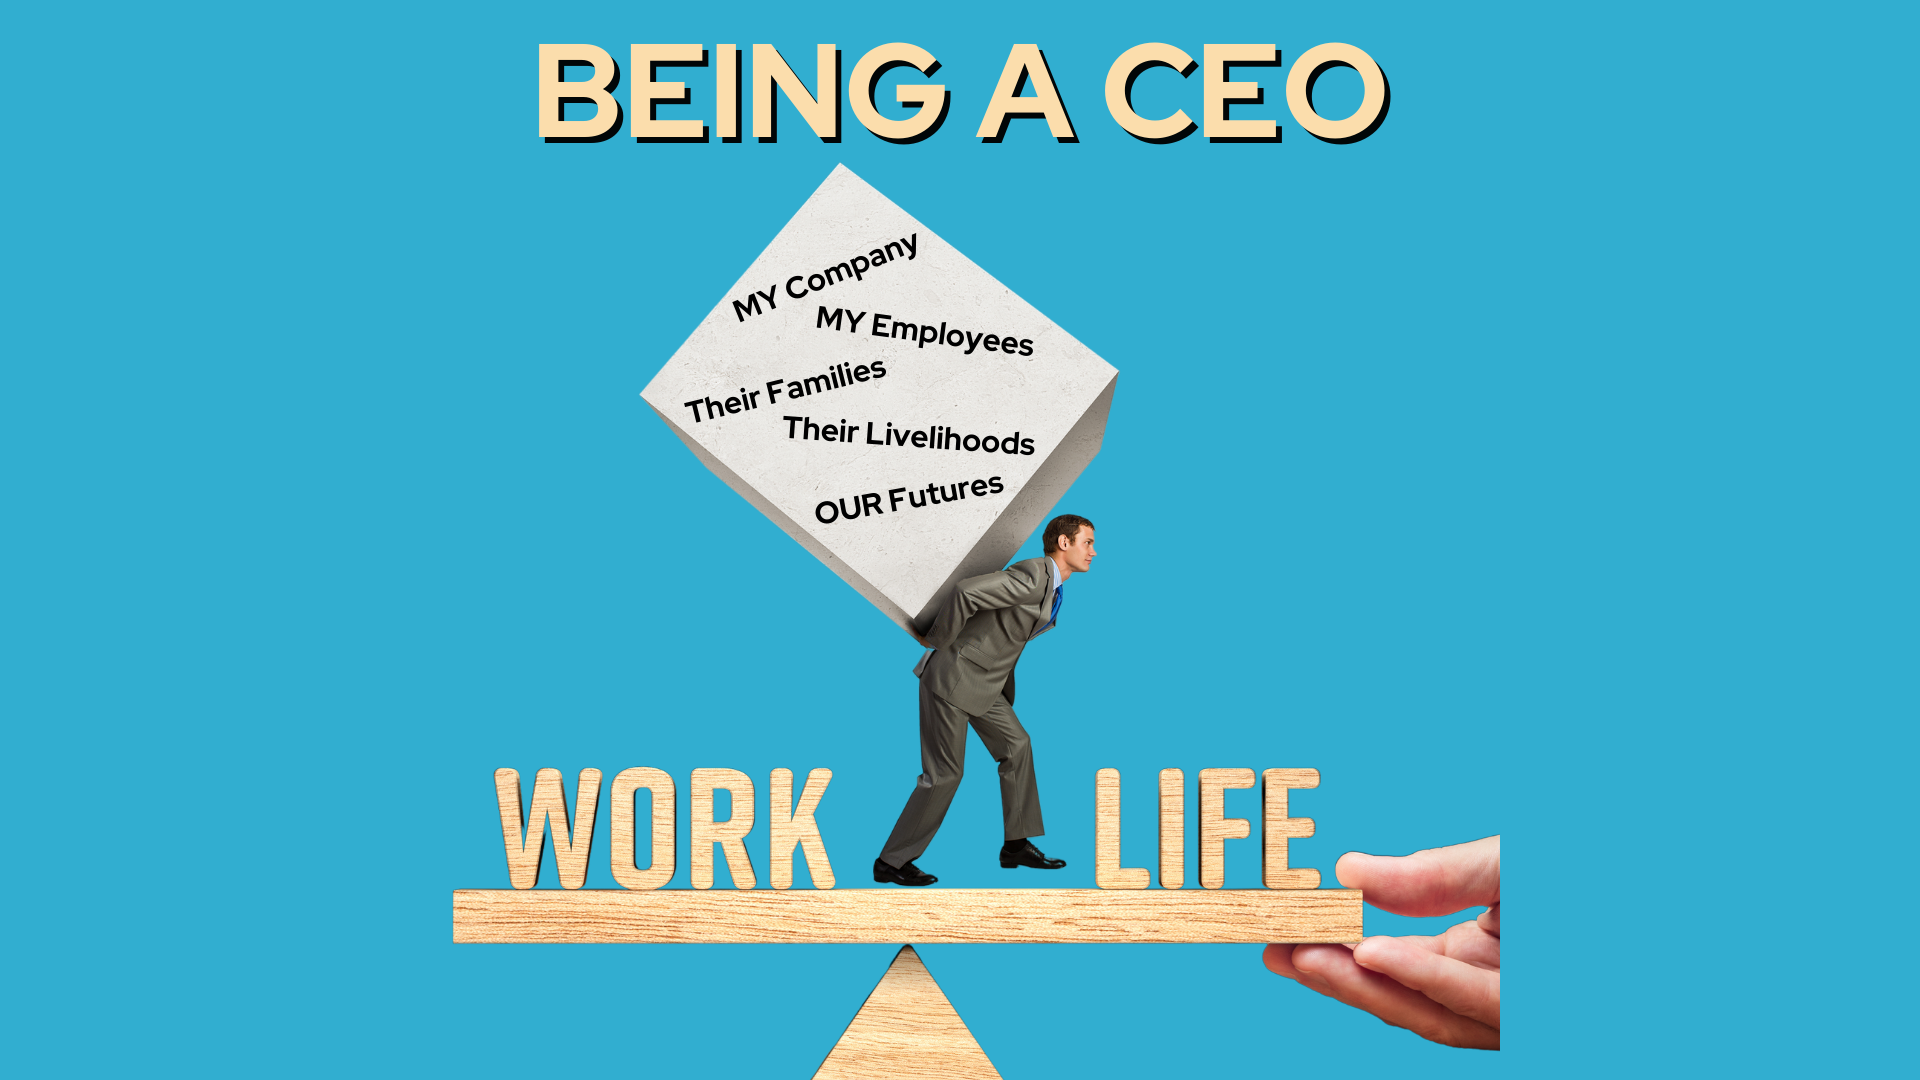 The title "Being A CEO" written above a man carrying a black on a teeter totter that is a metaphor for a work/life balance.